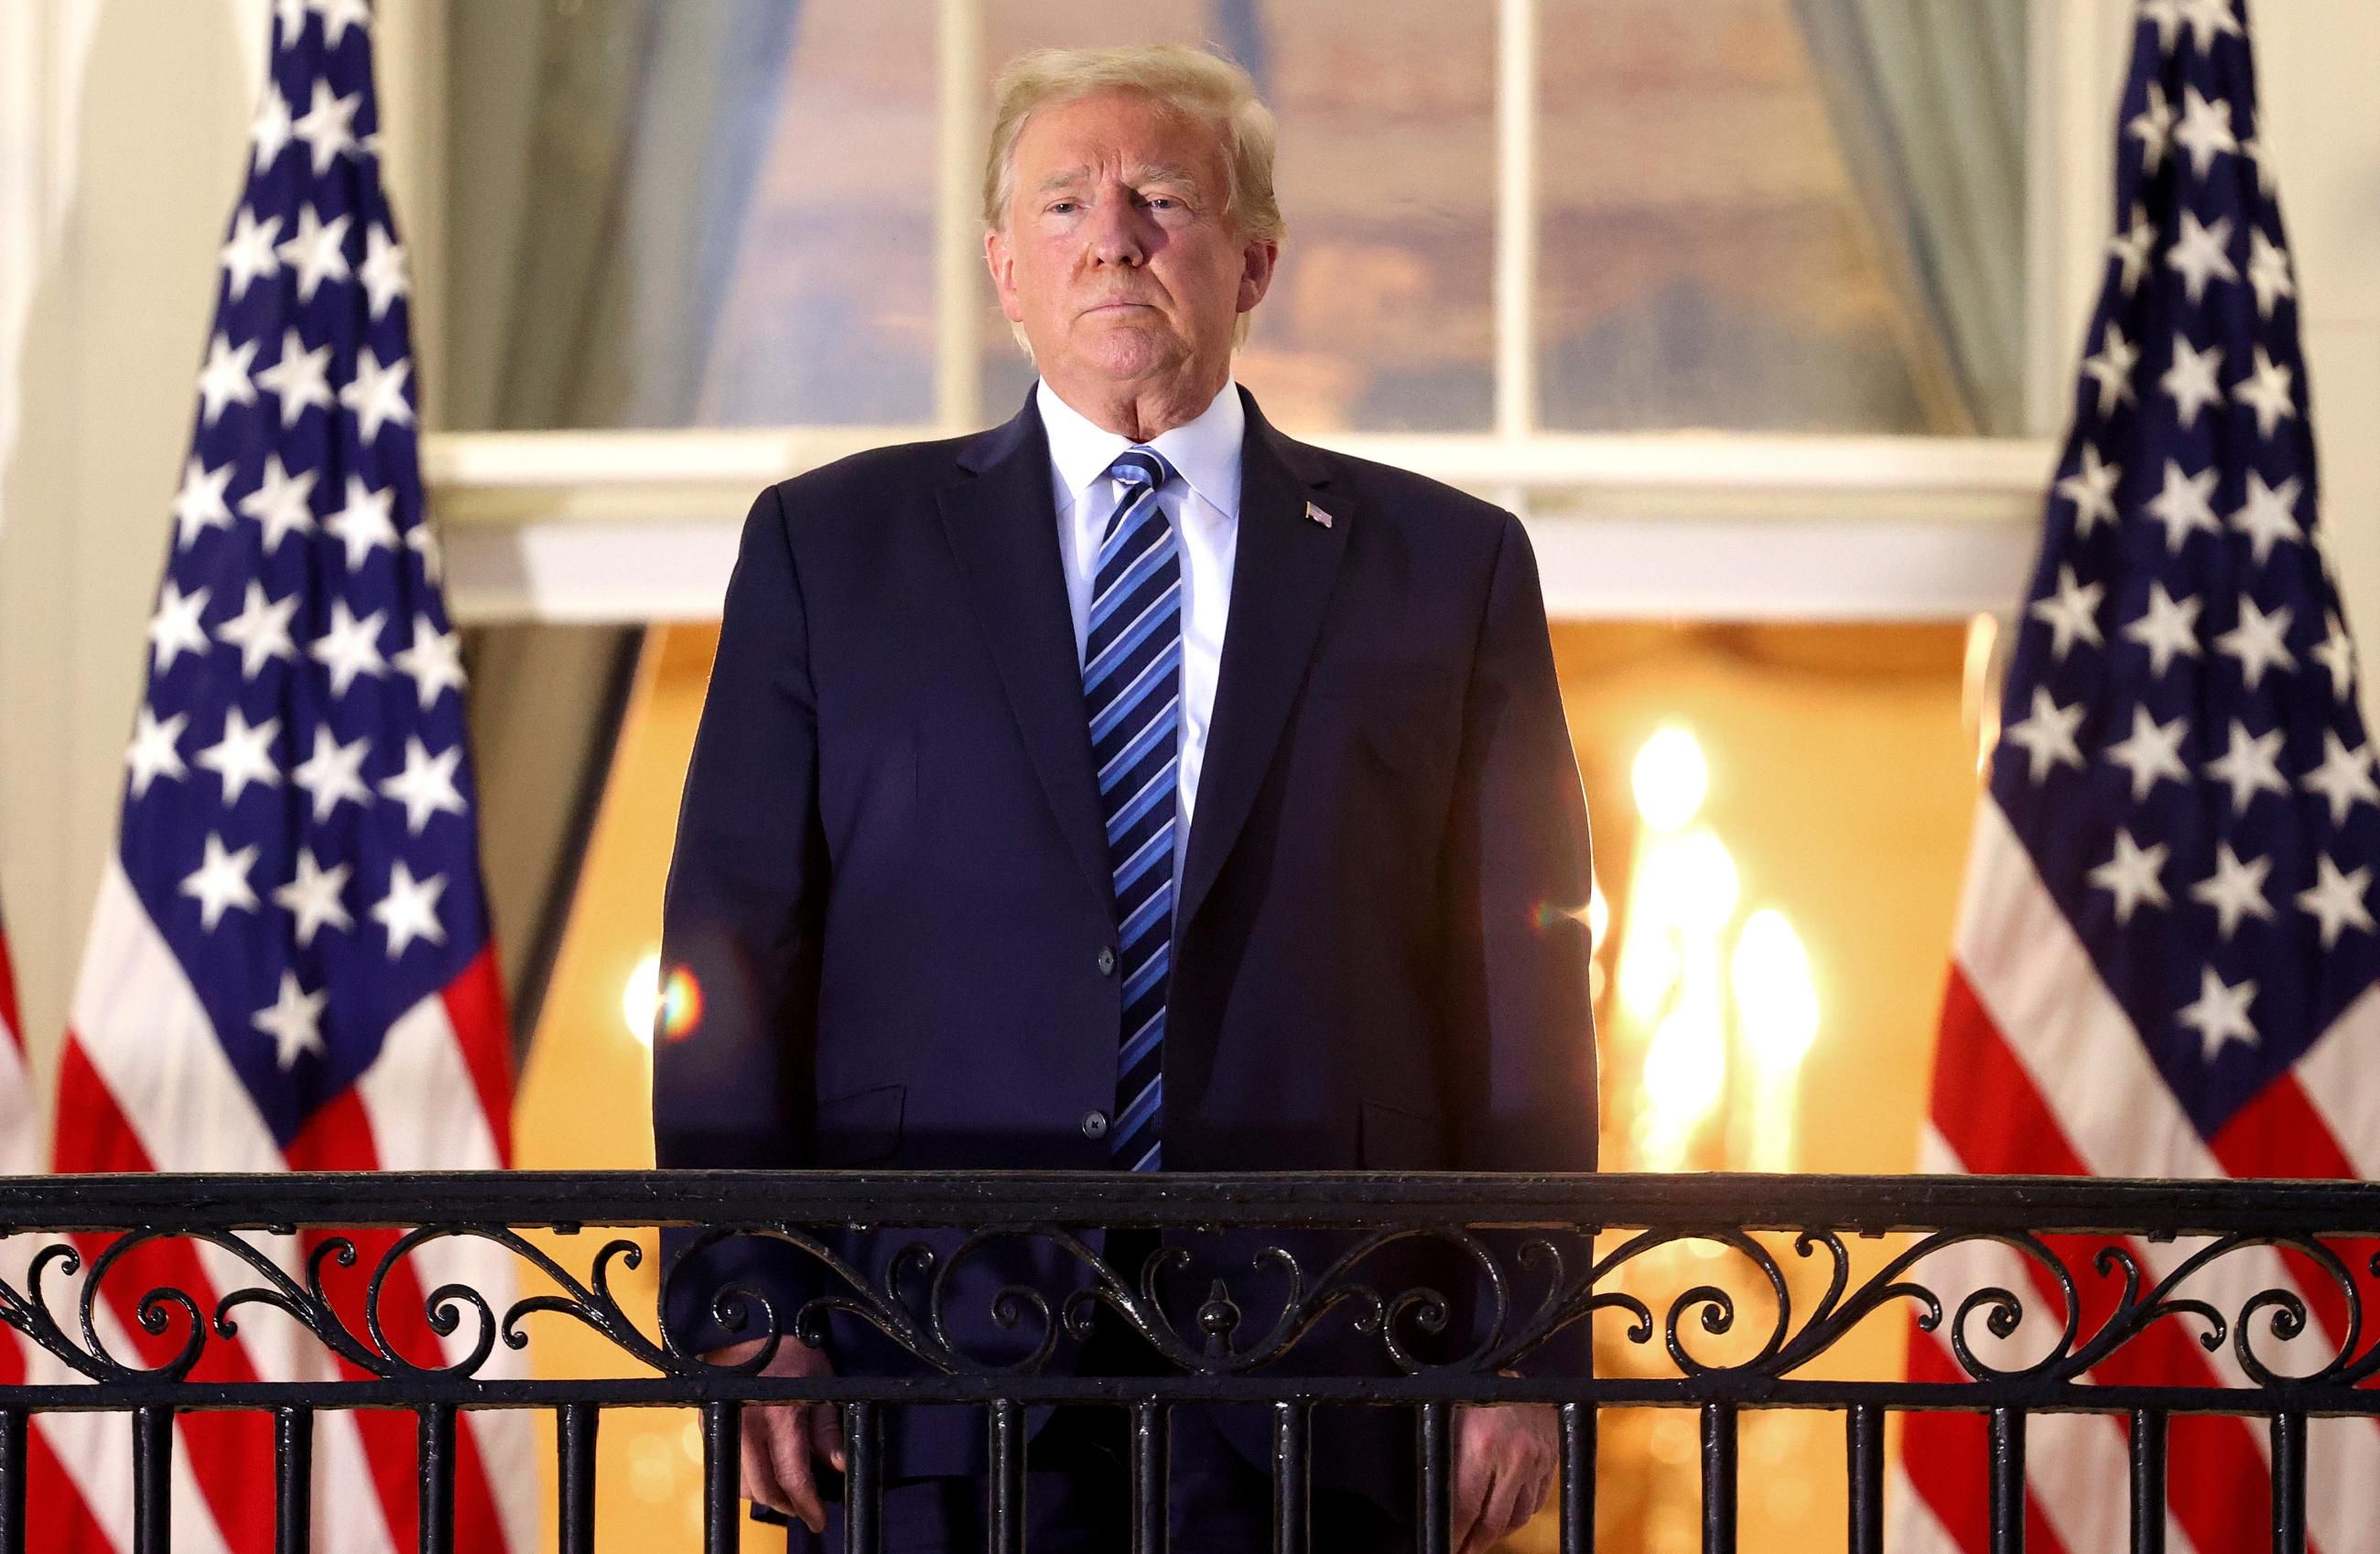 Then-President Donald Trump stands on the Truman Balcony after returning to the White House from Walter Reed National Military Medical Center on October 5, 2020 in Washington, D.C. (Photo: Win McNamee via Getty Images)